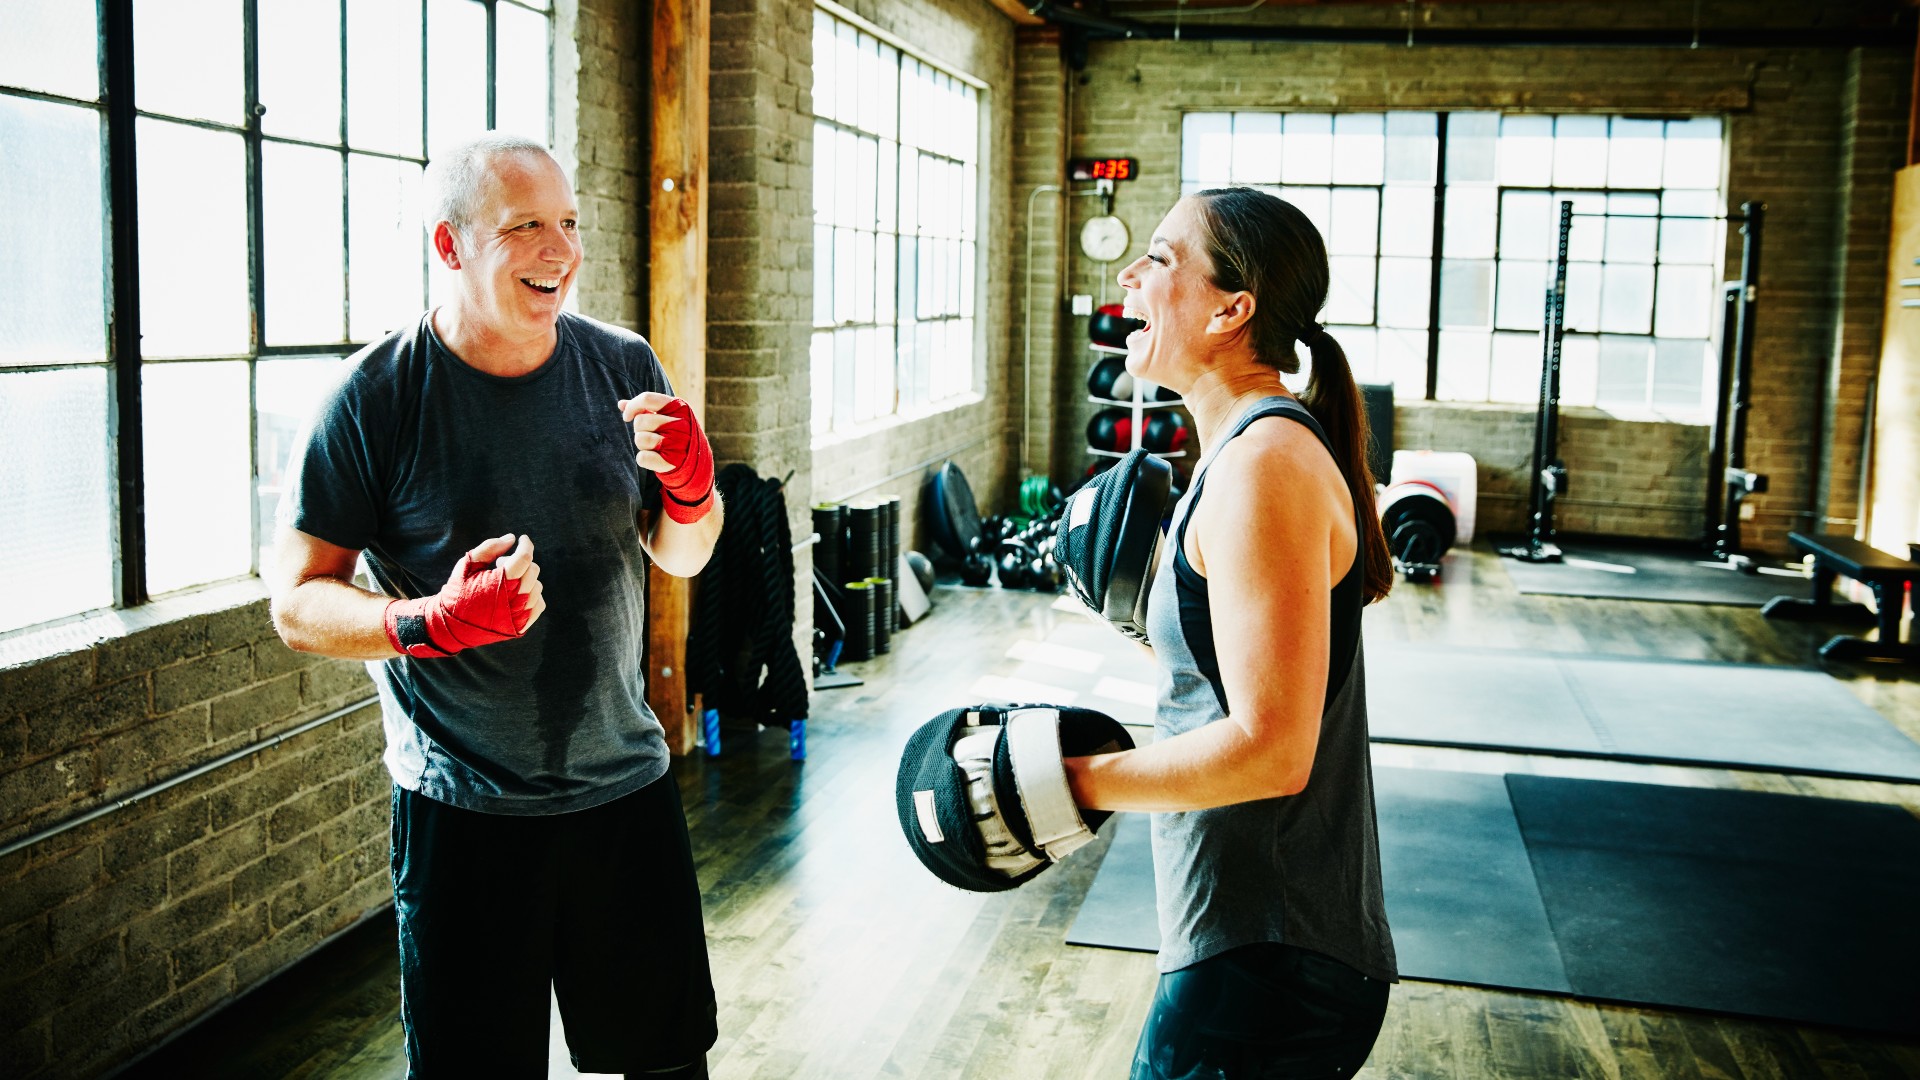 Mature athlete and coach laughing during boxing training session in gym